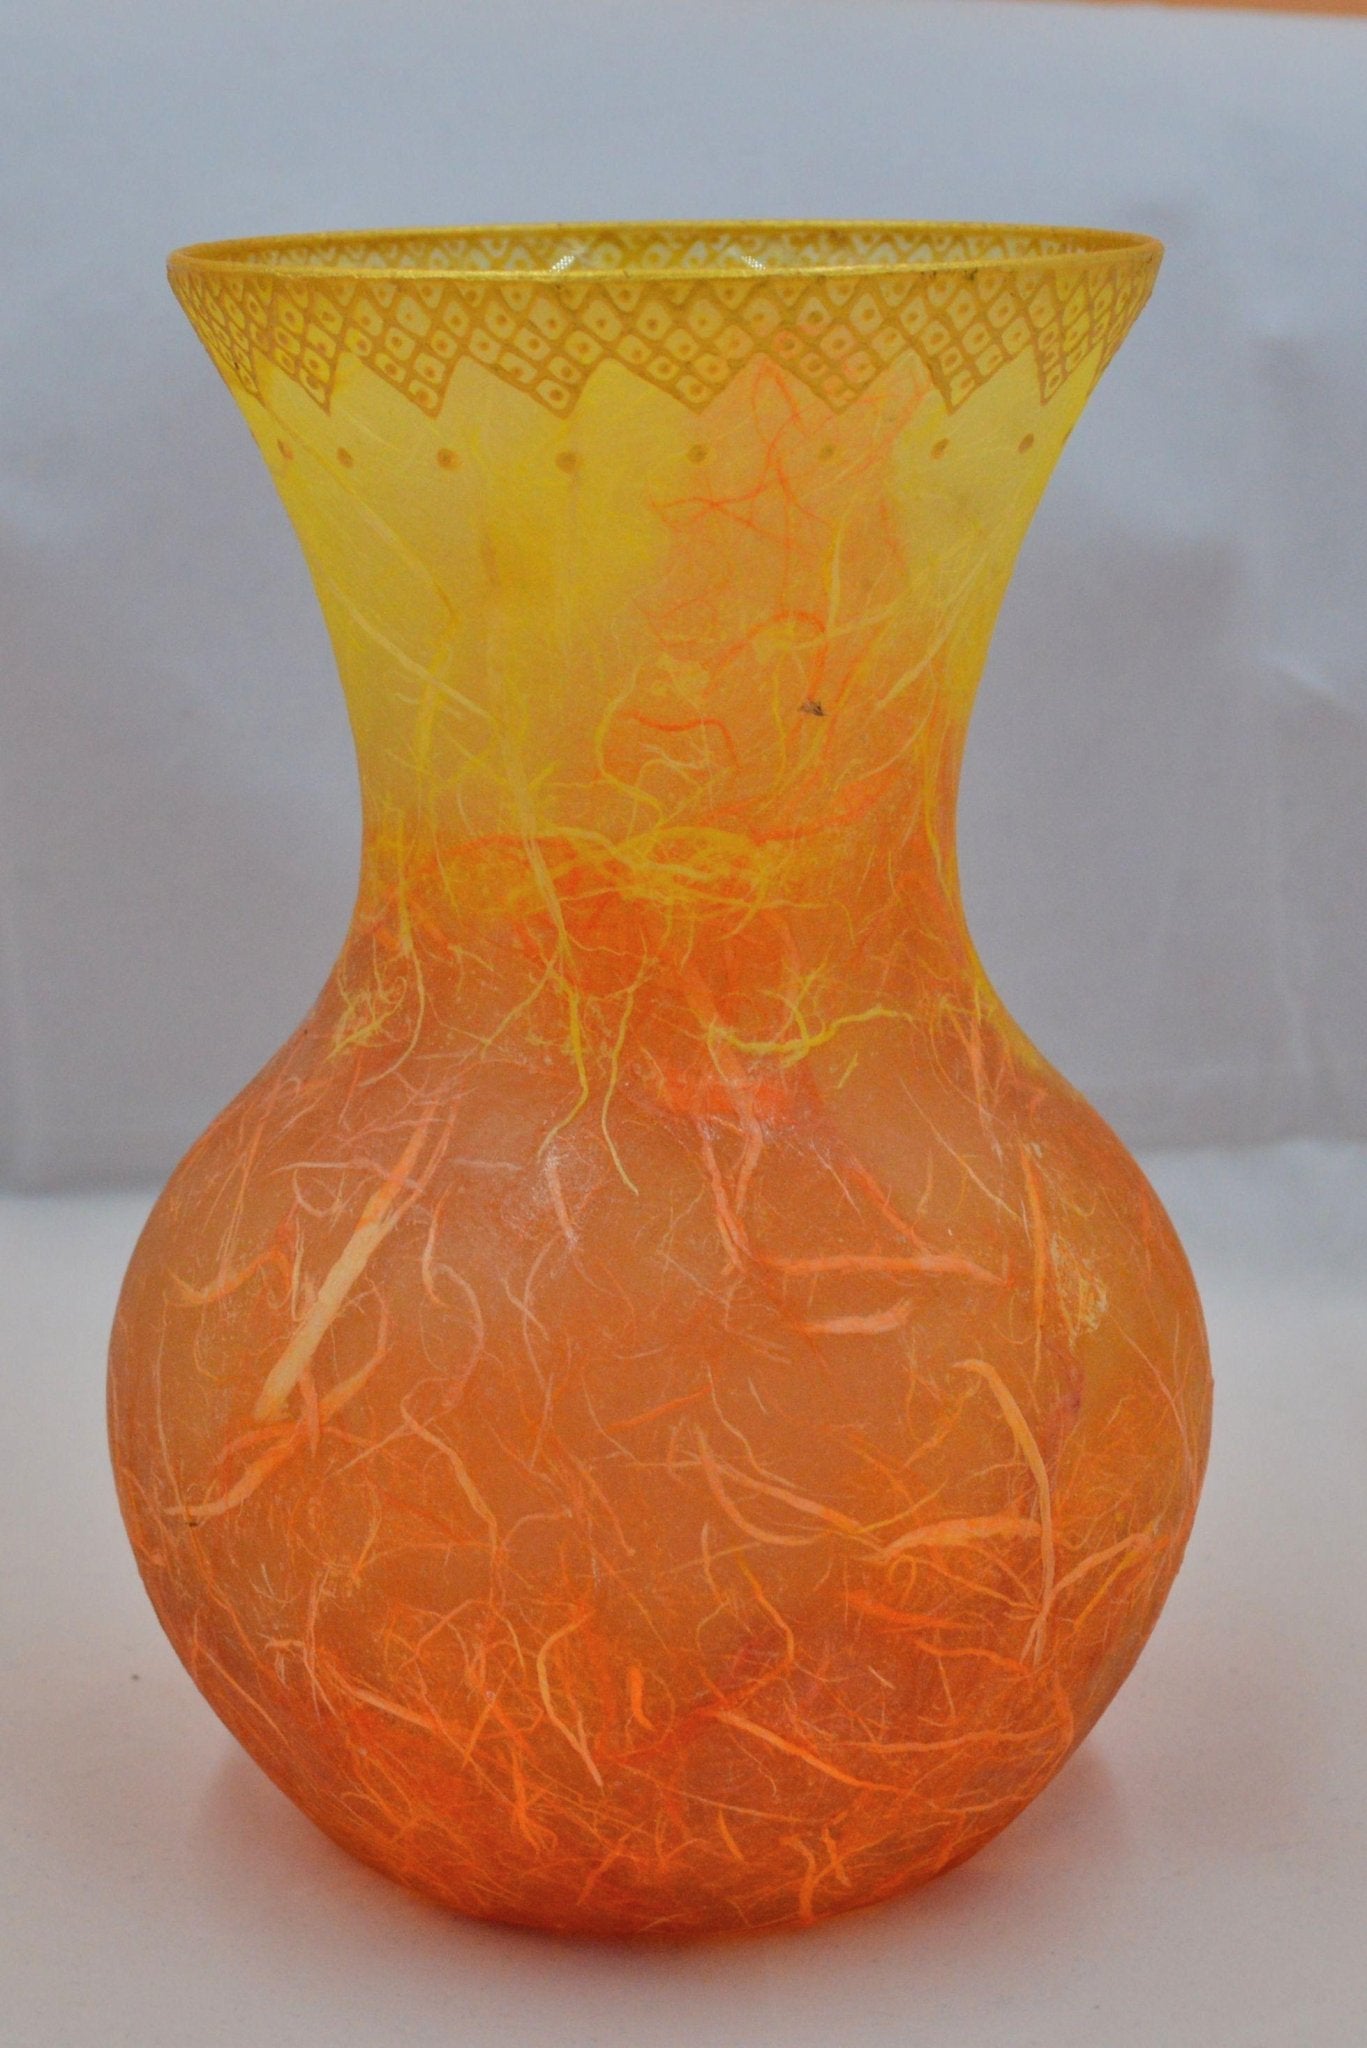 COLOURFUL ORANGE VASE WITH GOLD PATTERN TO TOP - TMD167207